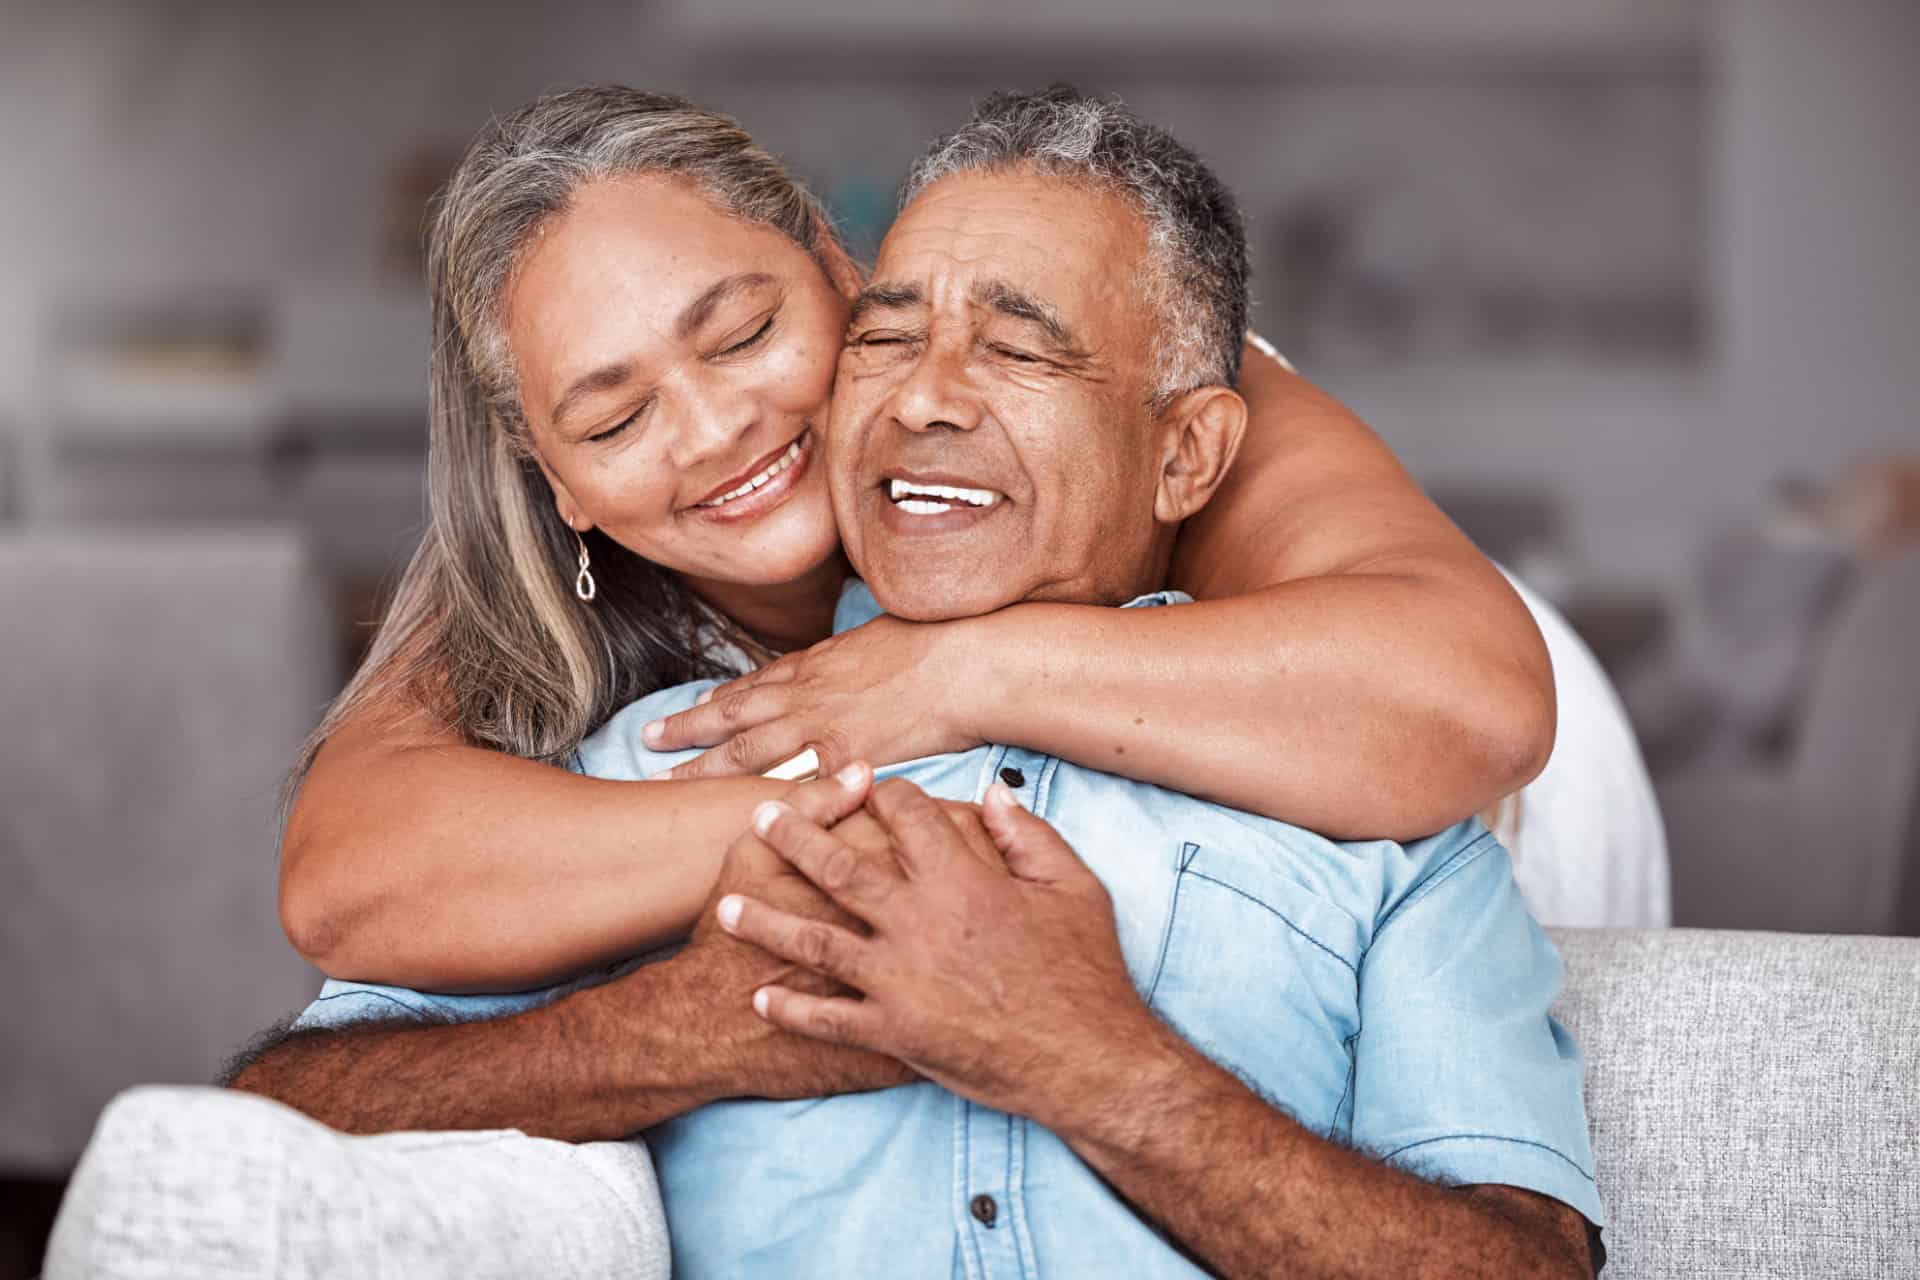 Happy Senior Couple, Hug And Relax In Love For Relationship Bonding Together In Tender Happiness At Home. Joyful Elderly Man And Woman Smile In Hope Embracing Romance For Retirement House On Sofa